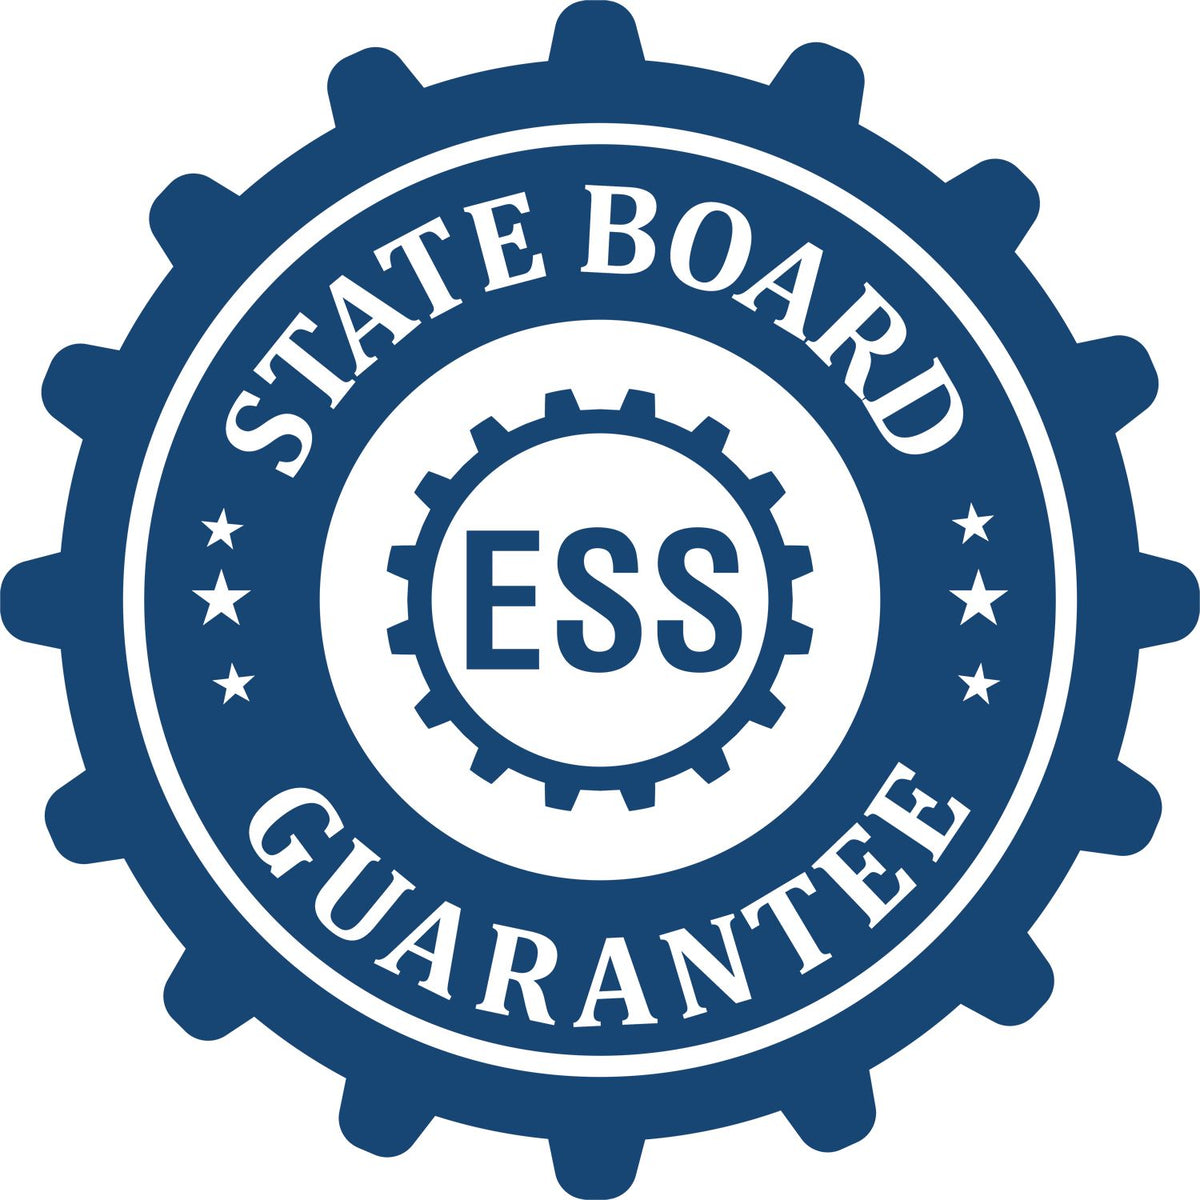 An emblem in a gear shape illustrating a state board guarantee for the Wooden Handle North Dakota Rectangular Notary Public Stamp product.